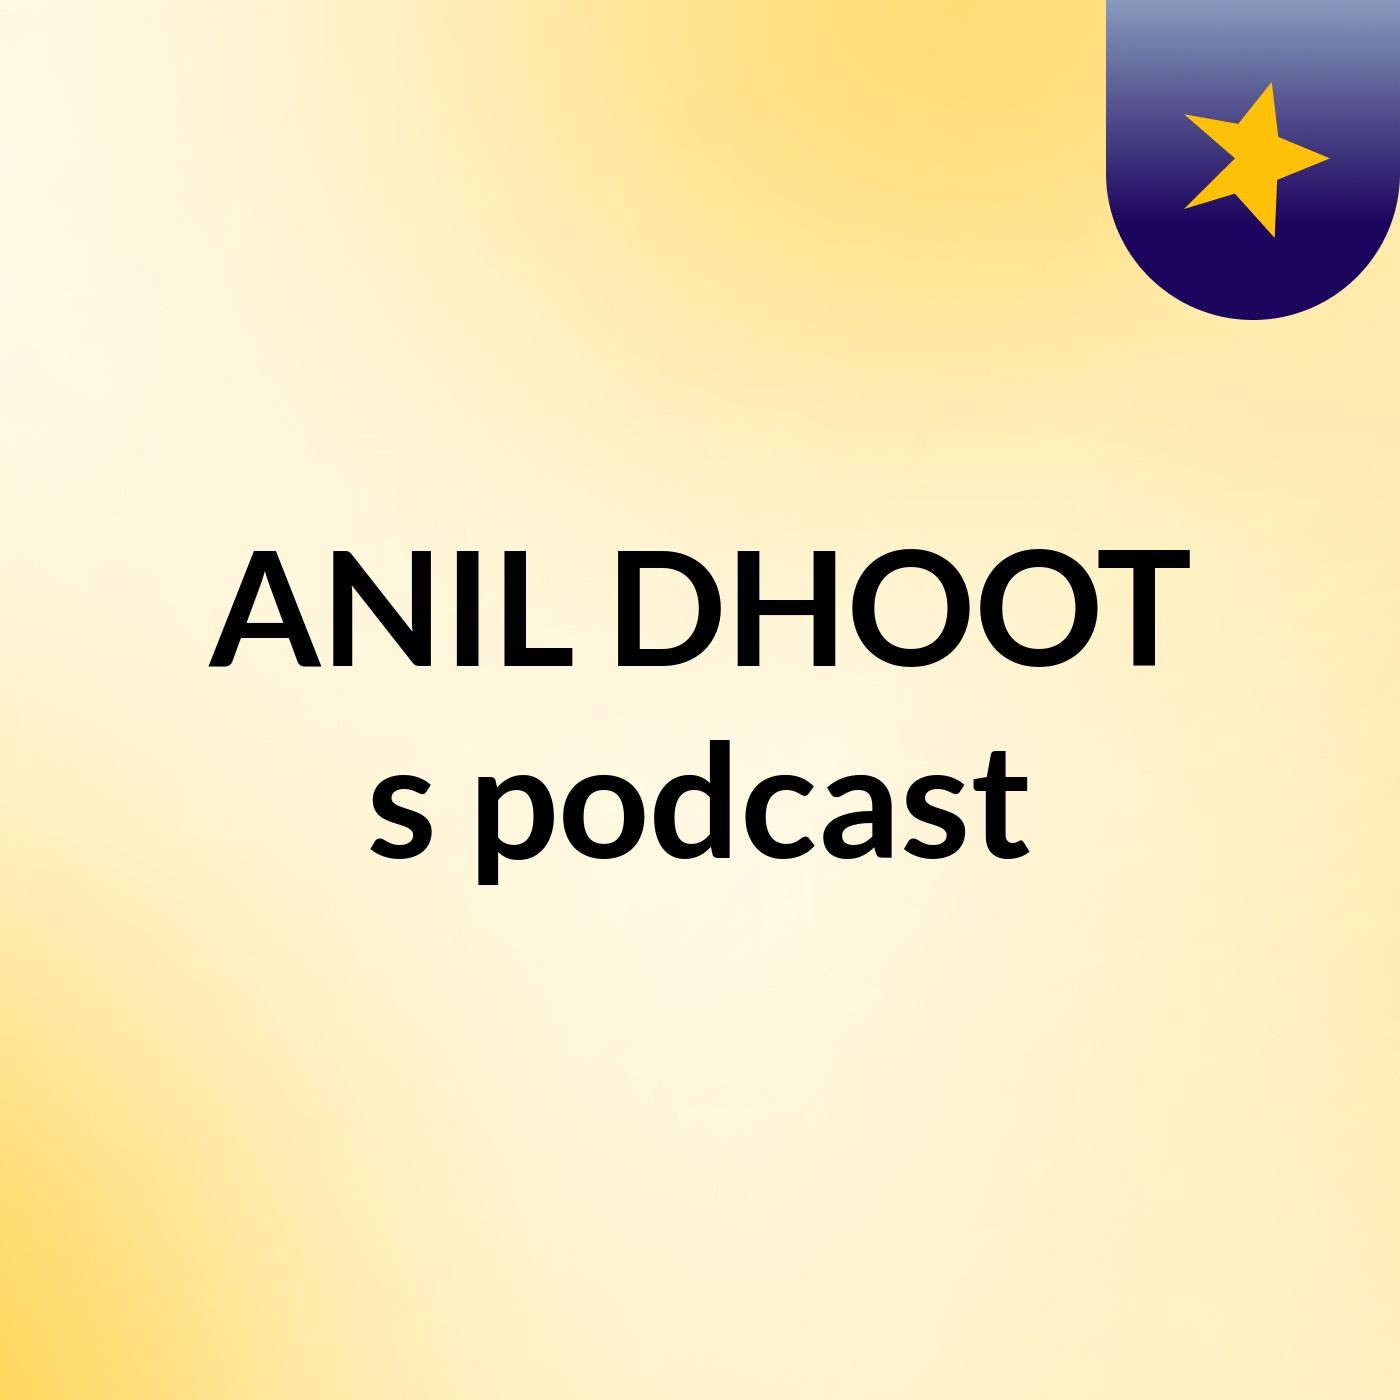 Episode 3 - ANIL DHOOT's podcast